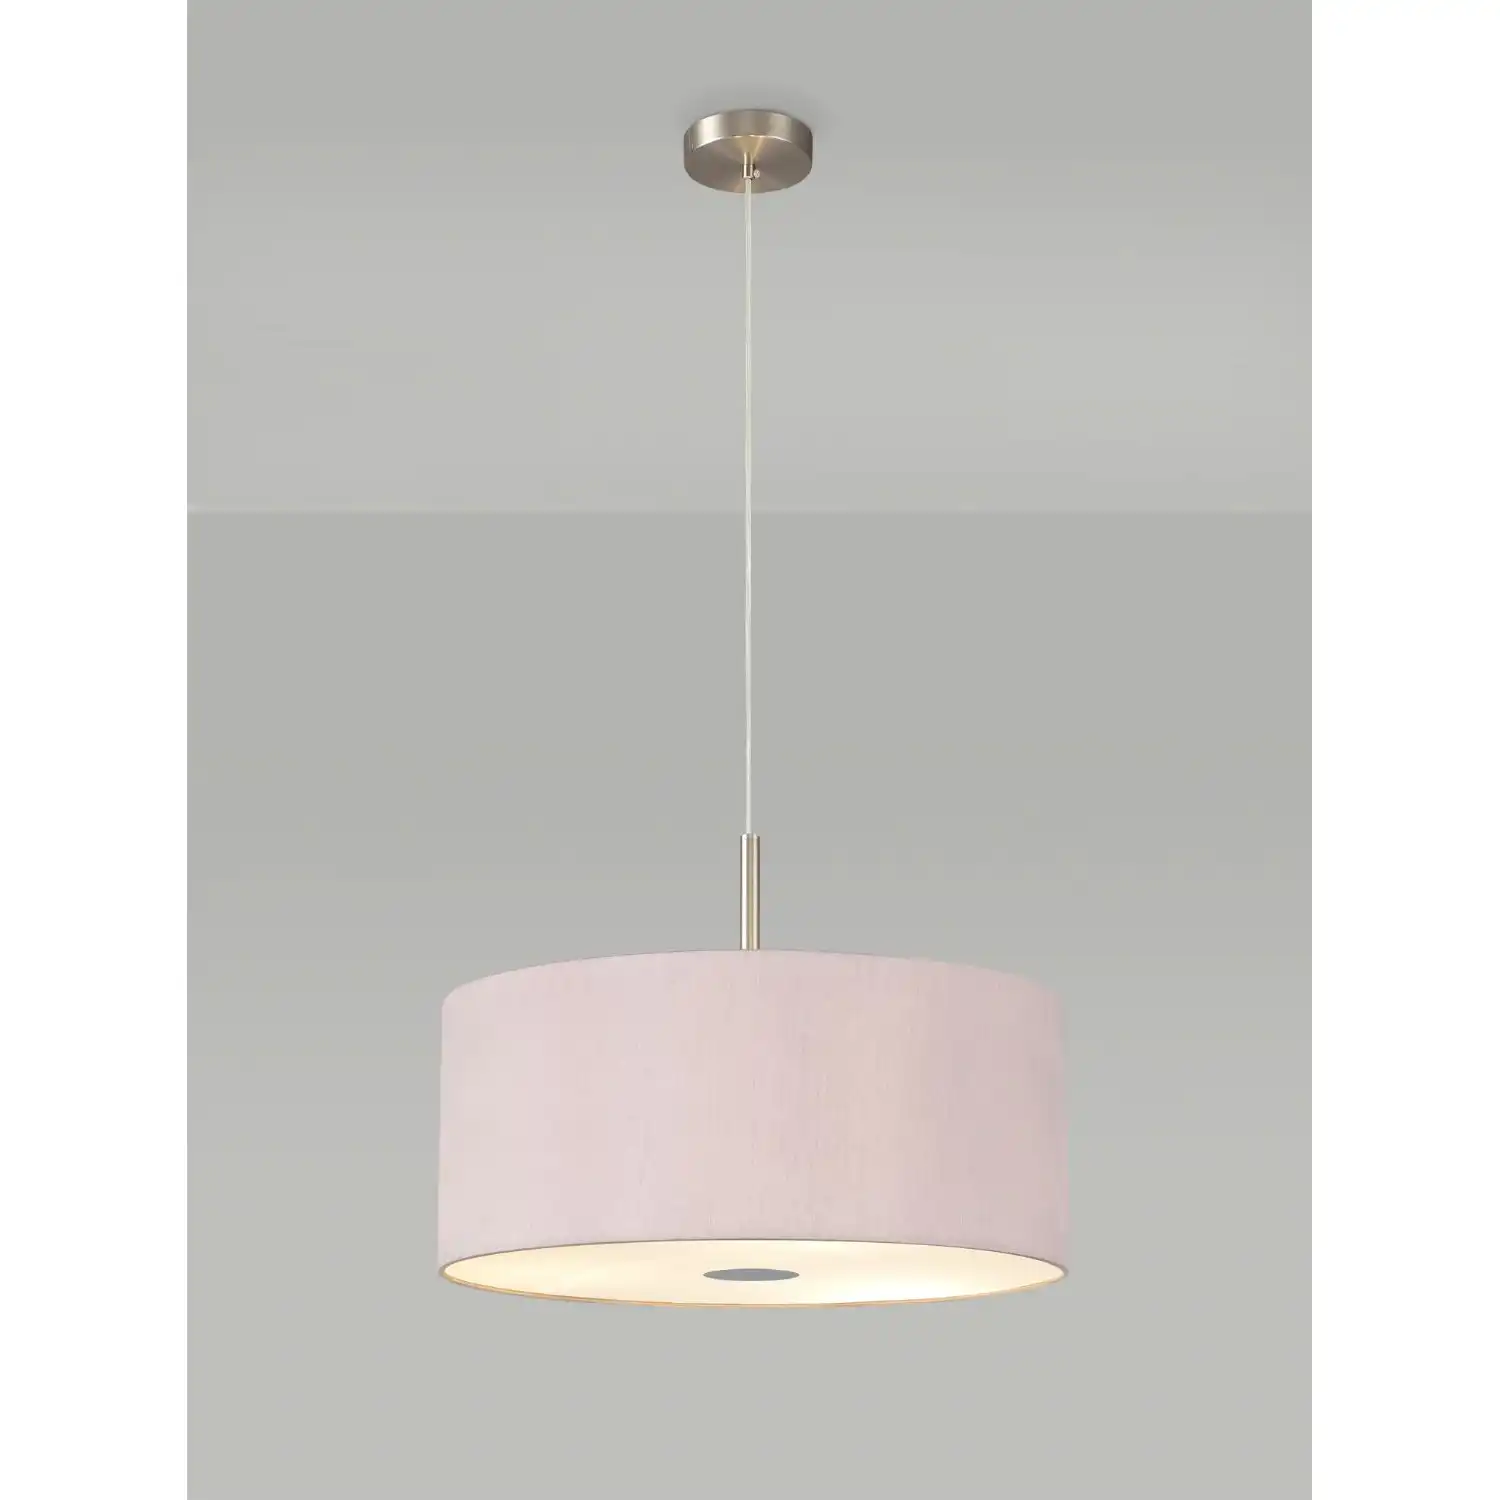 Baymont Satin Nickel 3m 3 Light E27 Single Pendant c w 500 x 200mm Dual Faux Silk Fabric Shade, Taupe Halo Gold And 500mm Frosted PC Acrylic Diffuser